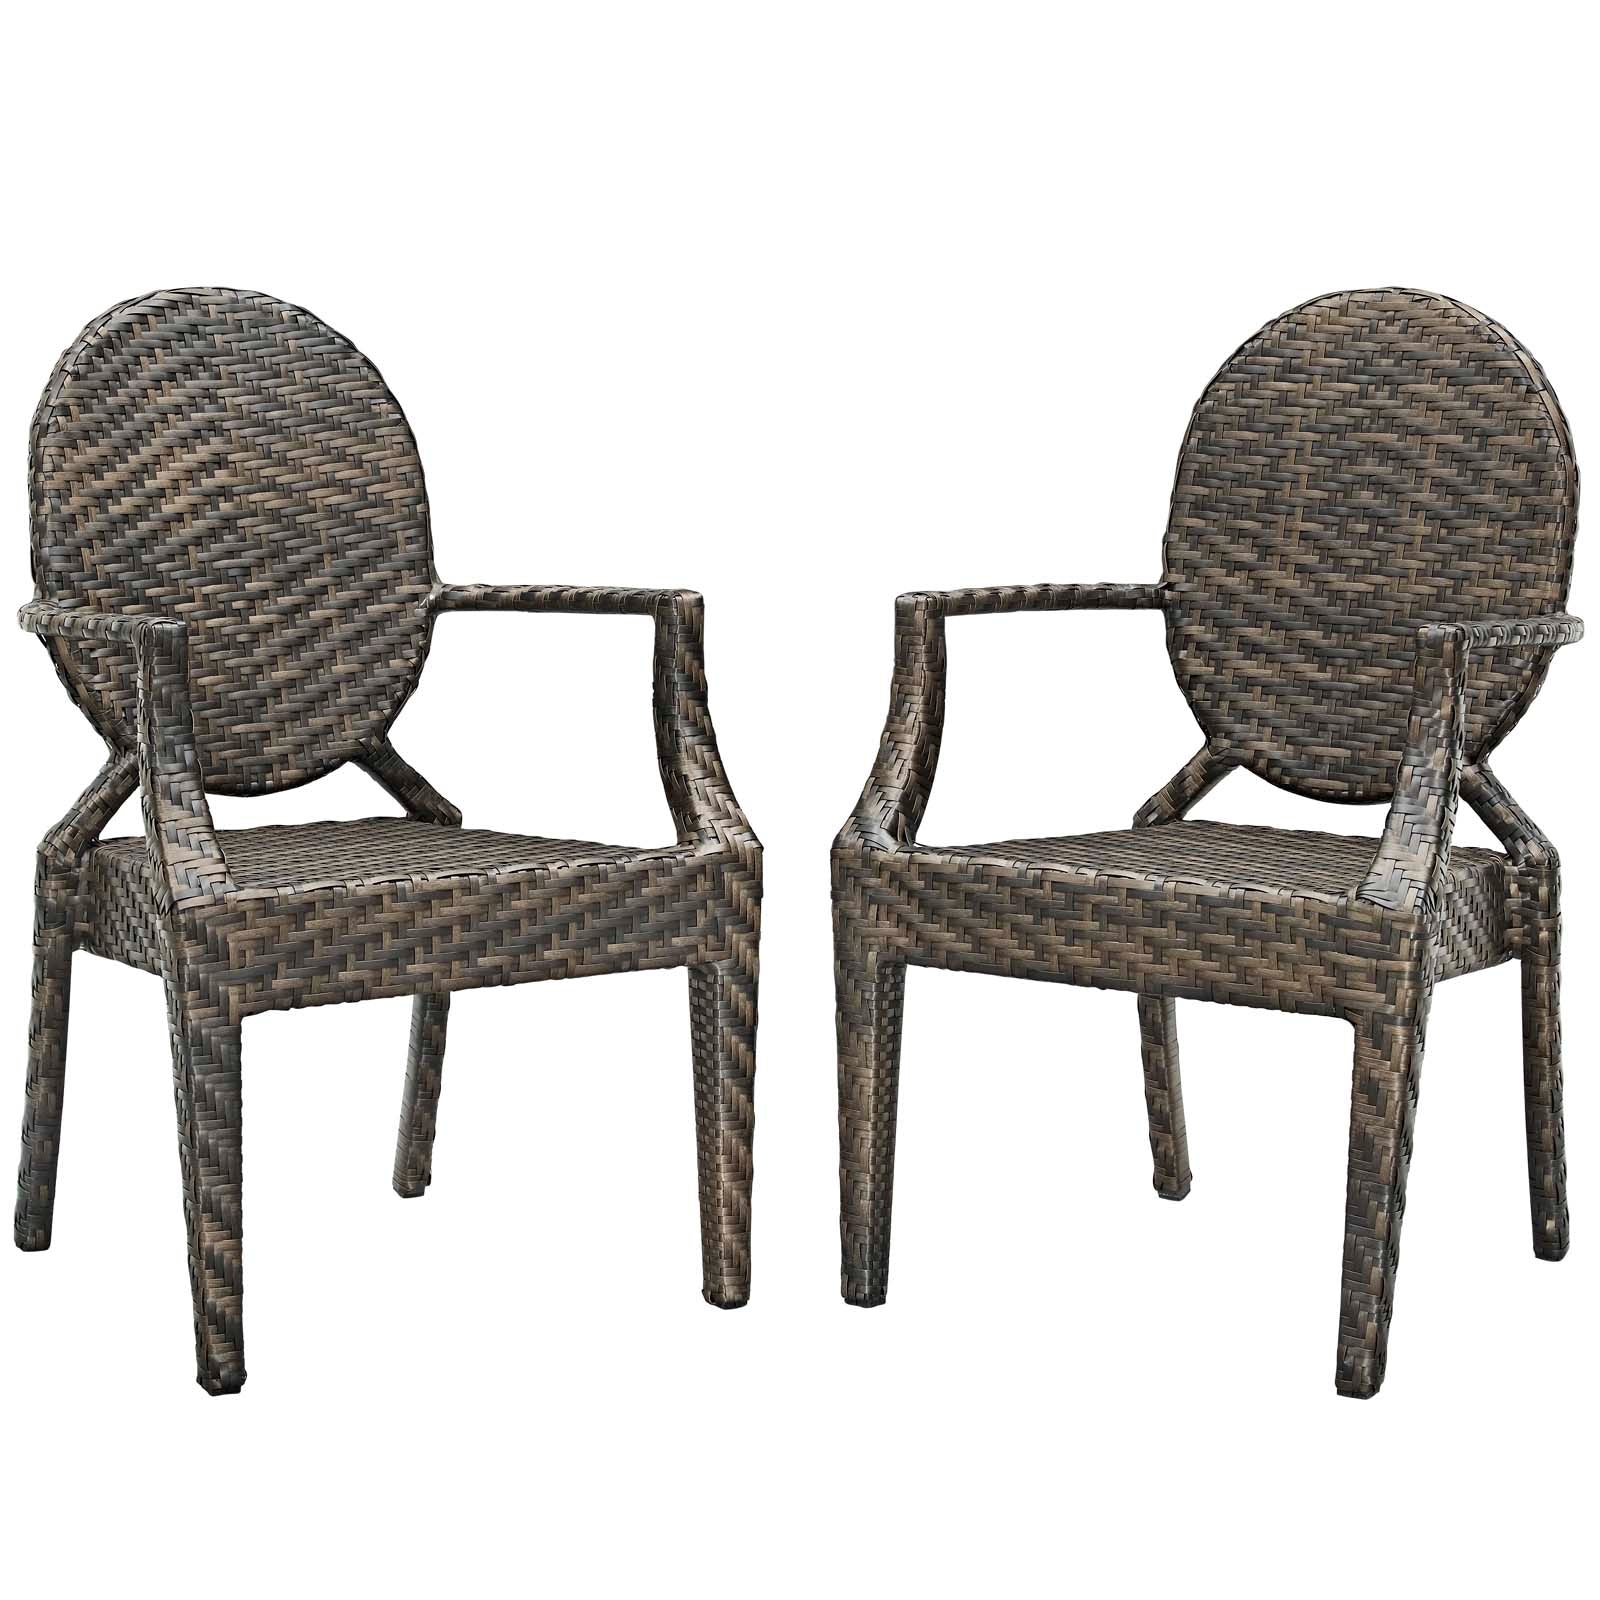 Casper Outdoor Patio Dining Armchair Set of 2 - East Shore Modern Home Furnishings